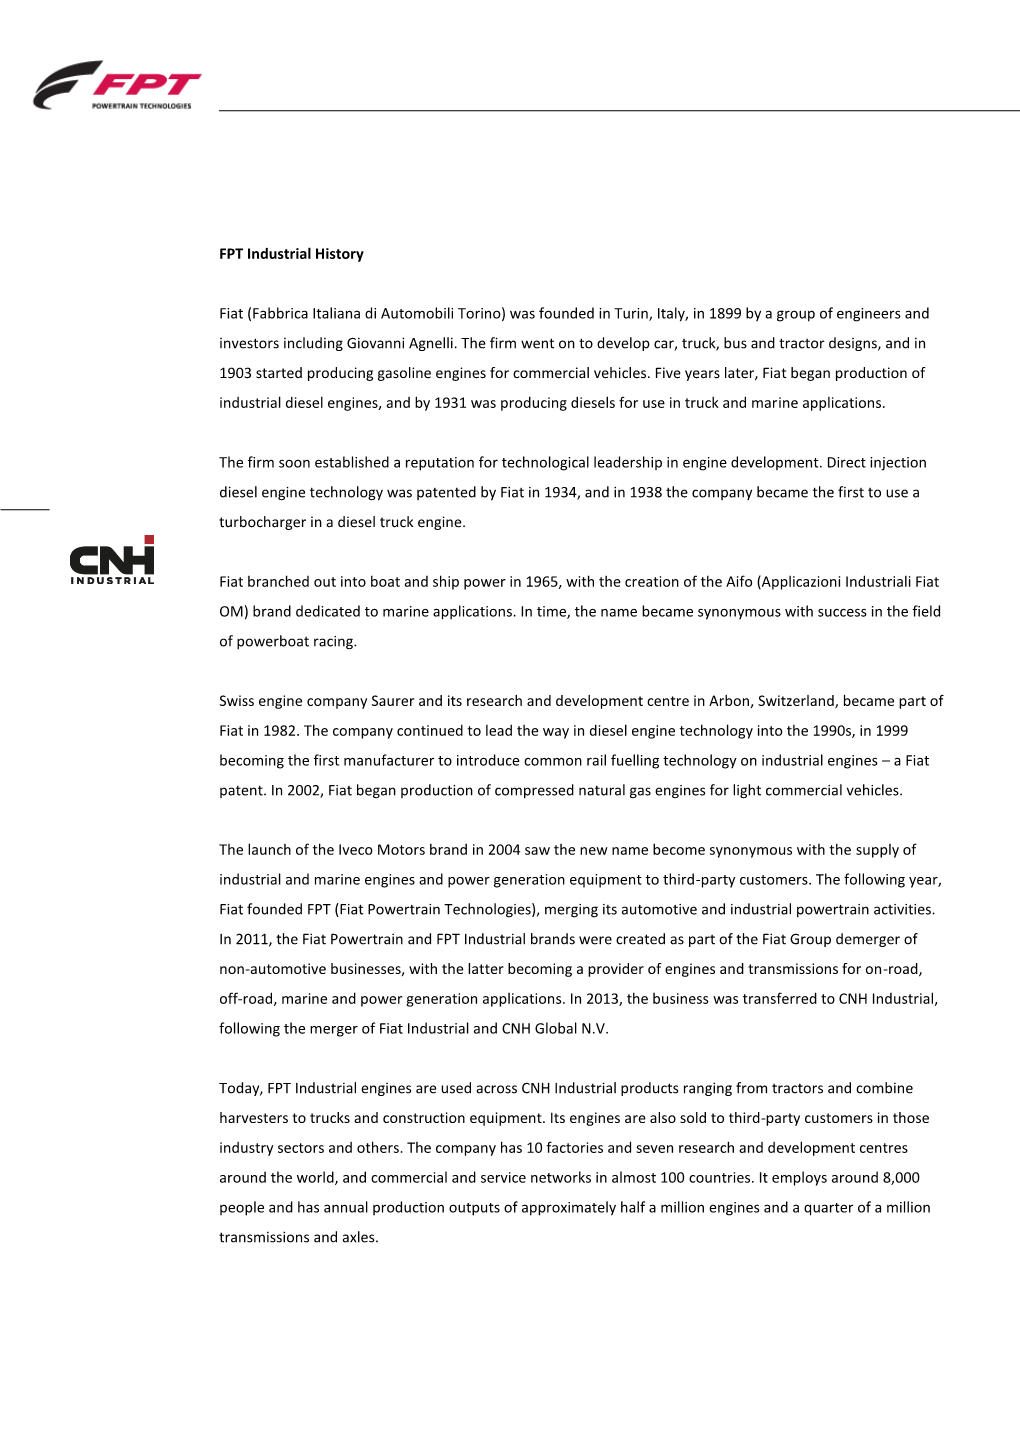 CNH Industrial, Following the Merger of Fiat Industrial and CNH Global N.V